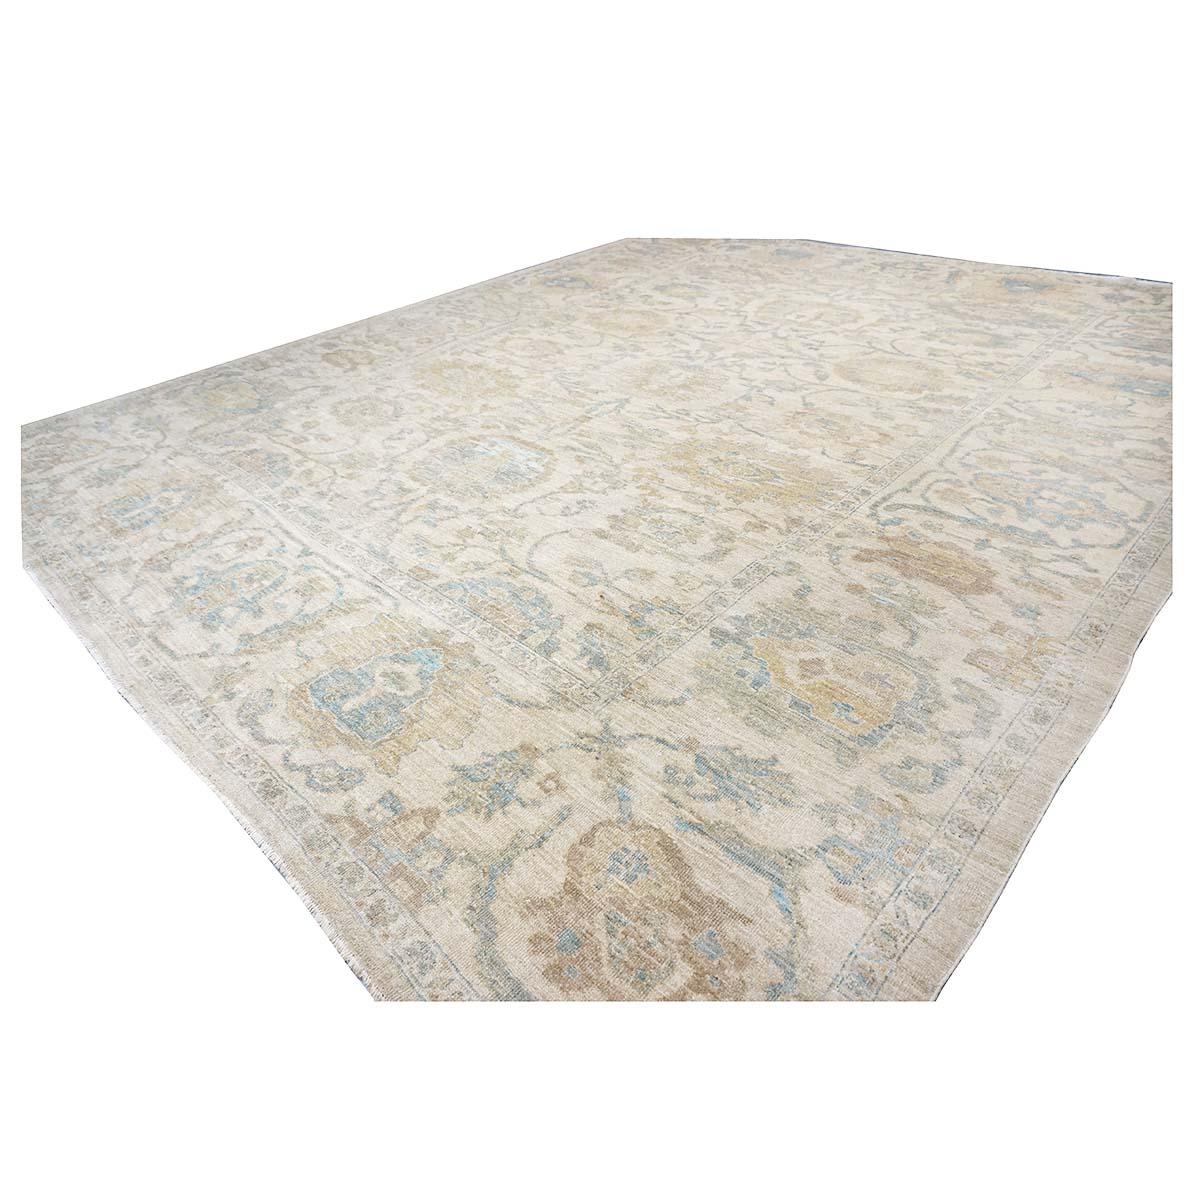 Contemporary 21st Century Persian Sultanabad Master 12x15 Ivory & Tan Handmade Area Rug For Sale